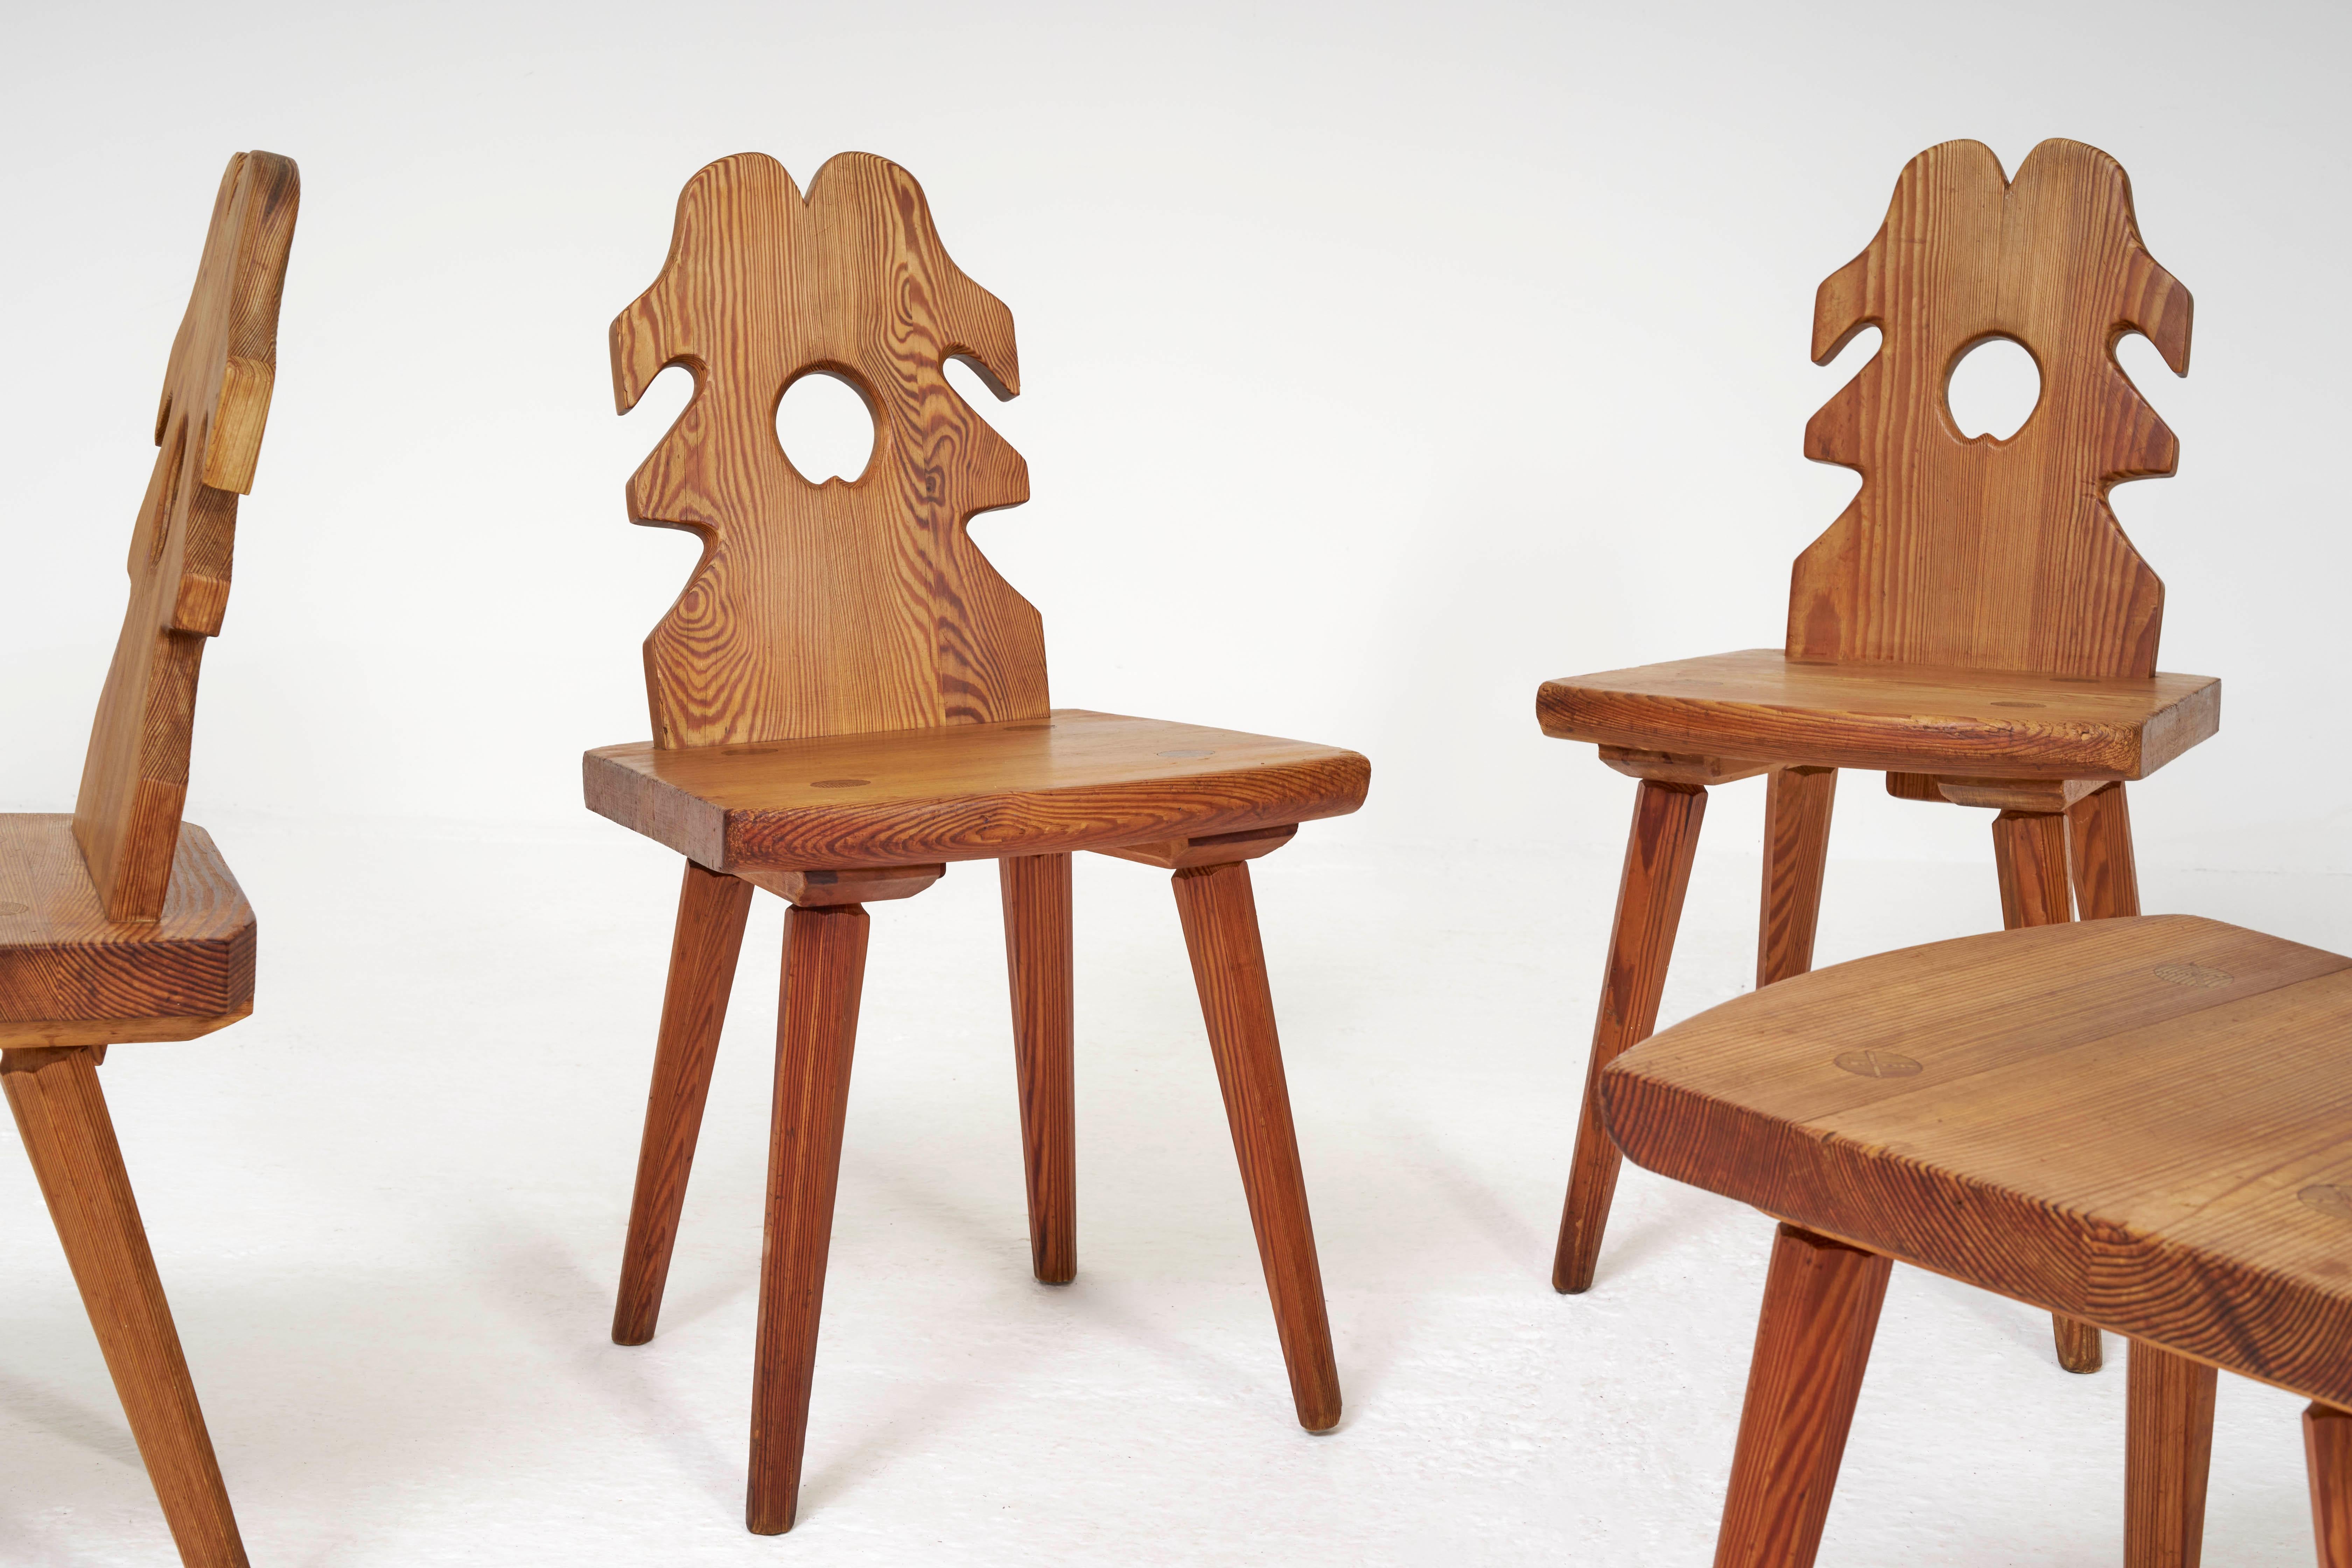 Set of 4 solid pine brutalist chairs. Made in Sweden circa 1960's / 1970's. Crafted from robust pine wood, these chairs are built to withstand daily use and provide long-lasting durability. The condition of each chair is very good with minimal wear